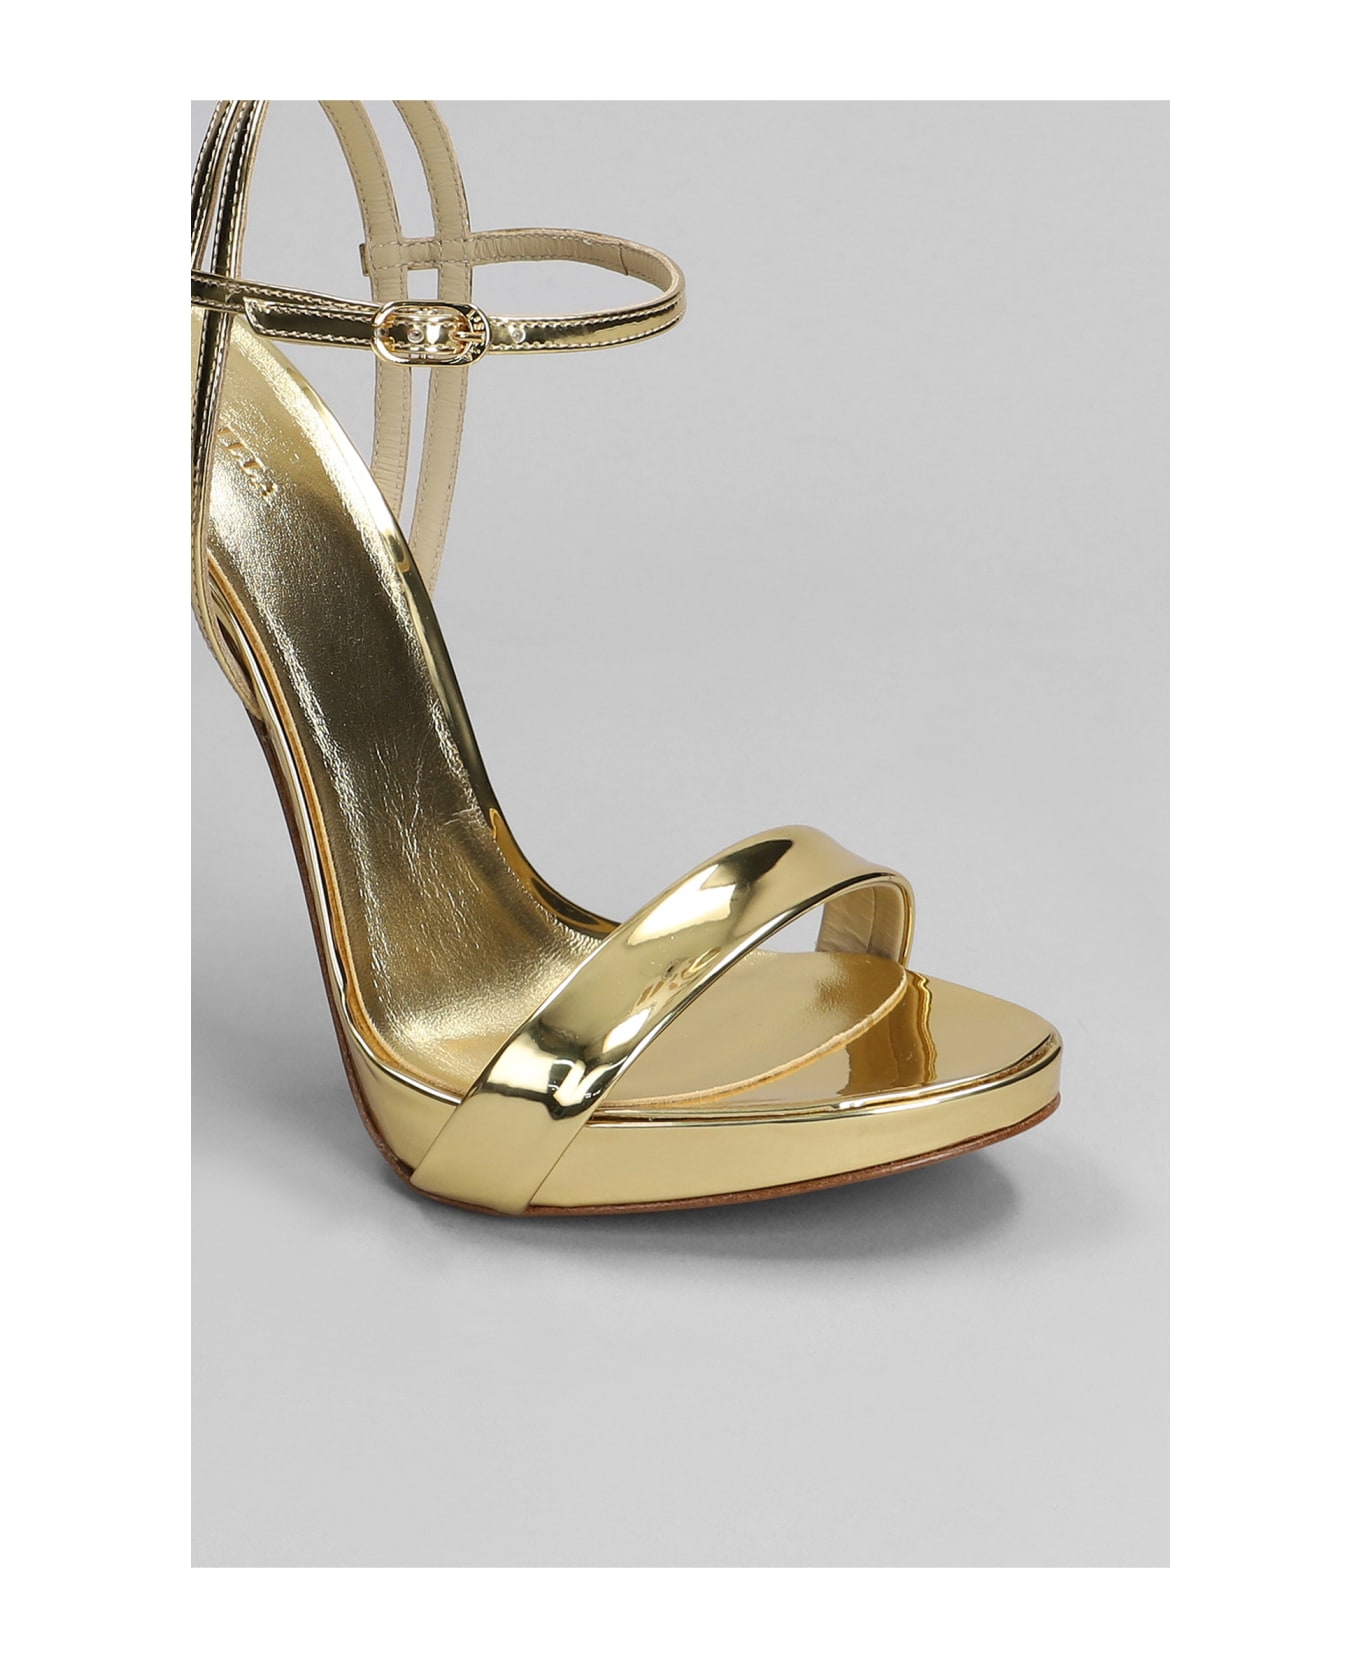 Le Silla Gwen Sandals In Gold Leather - gold サンダル